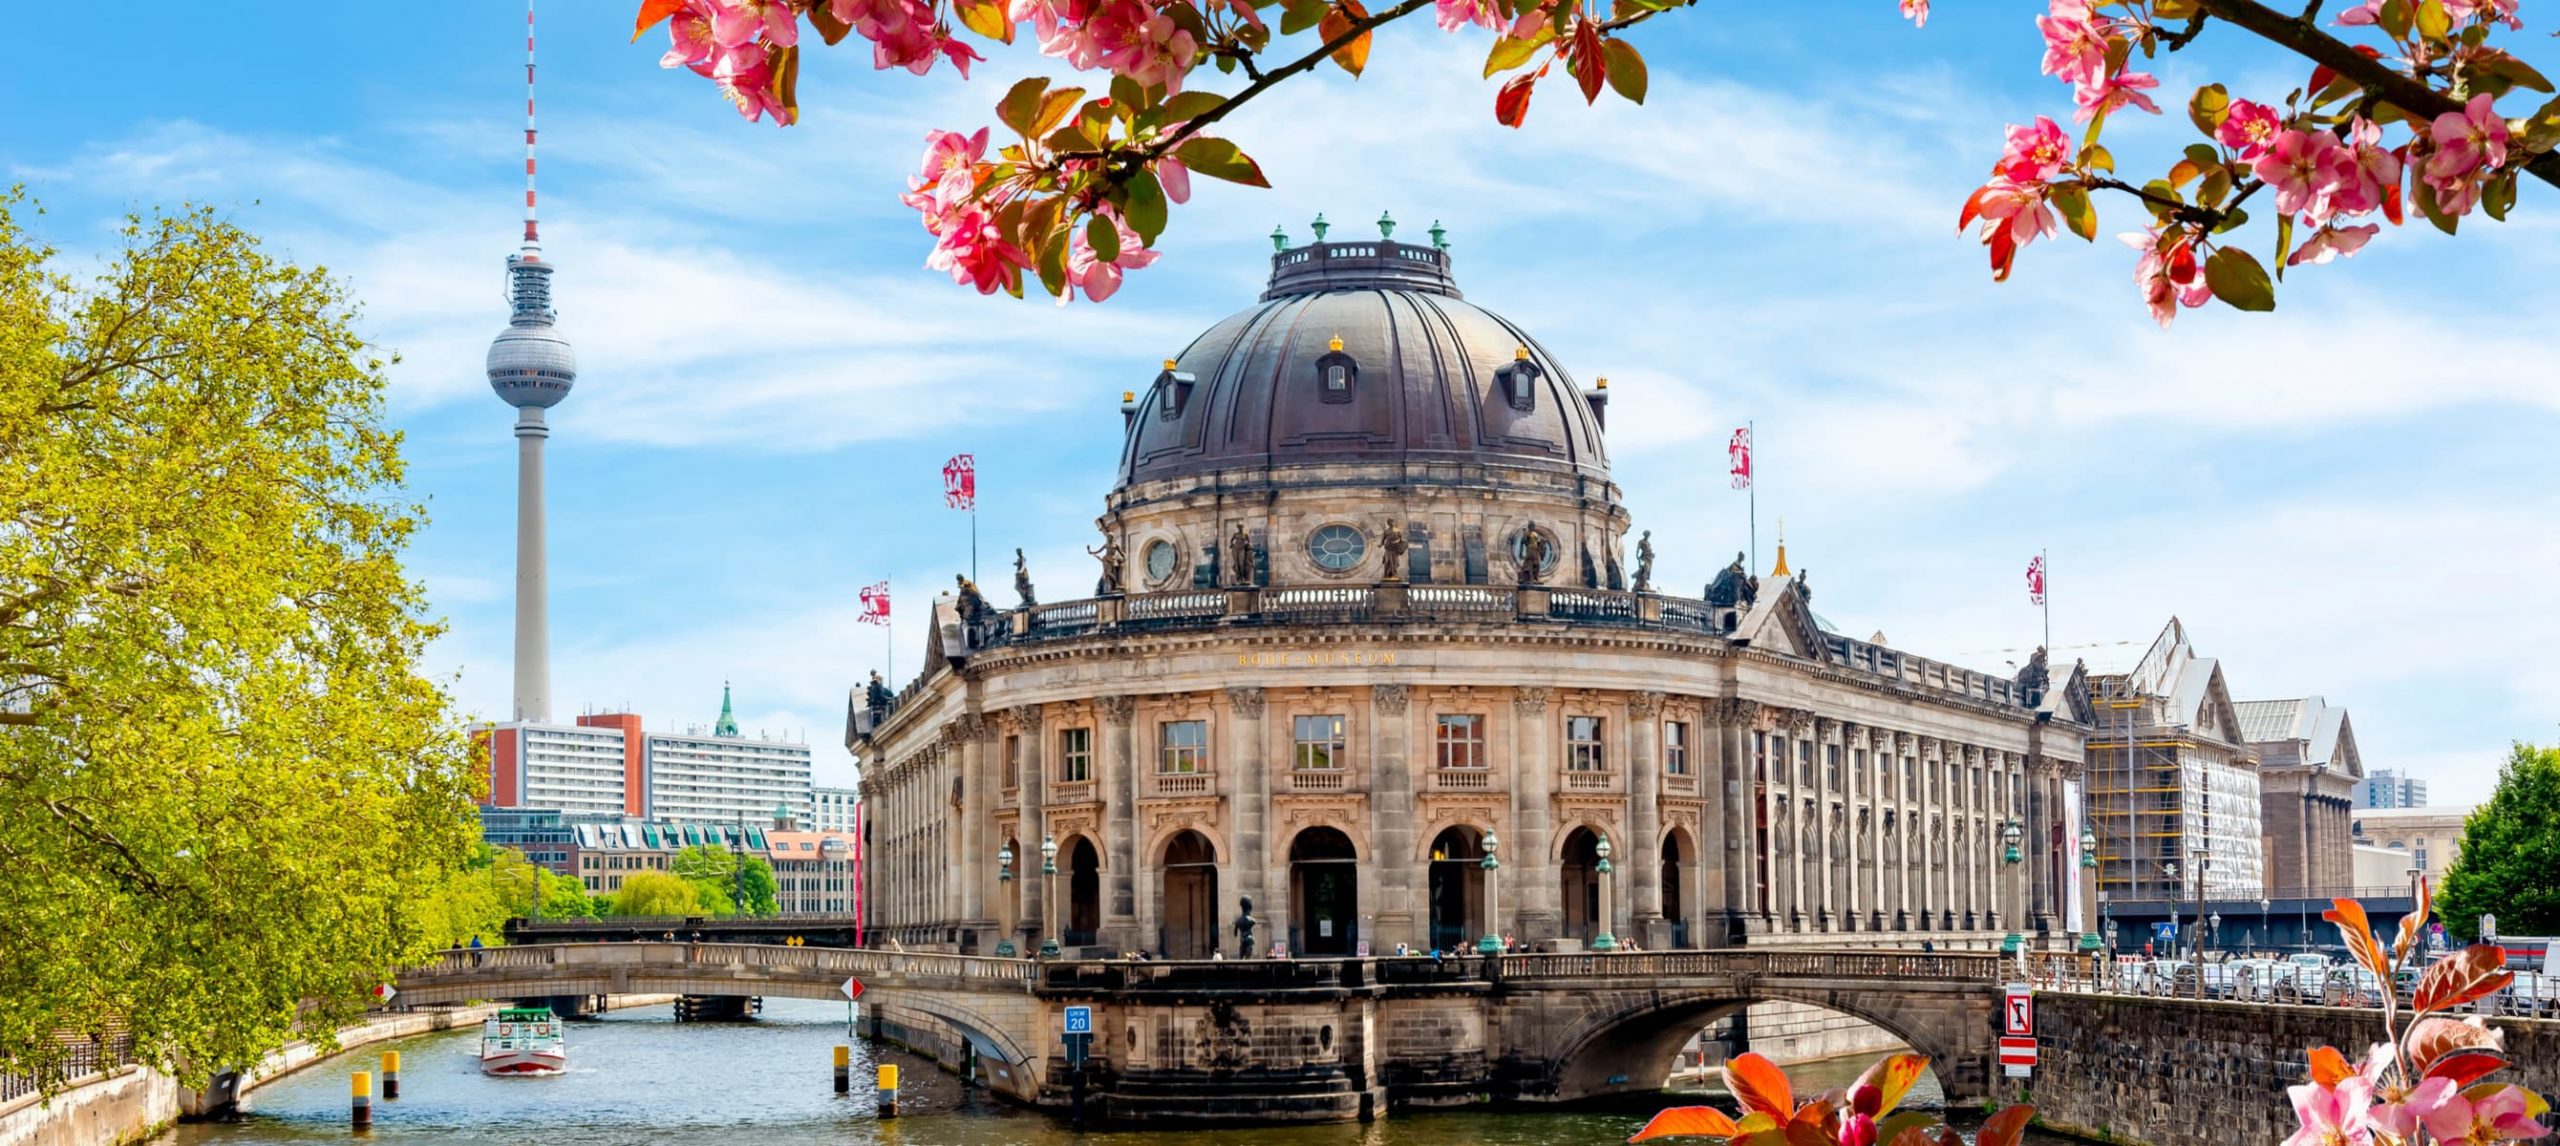 The Museum Island, in Berlin, during Spring